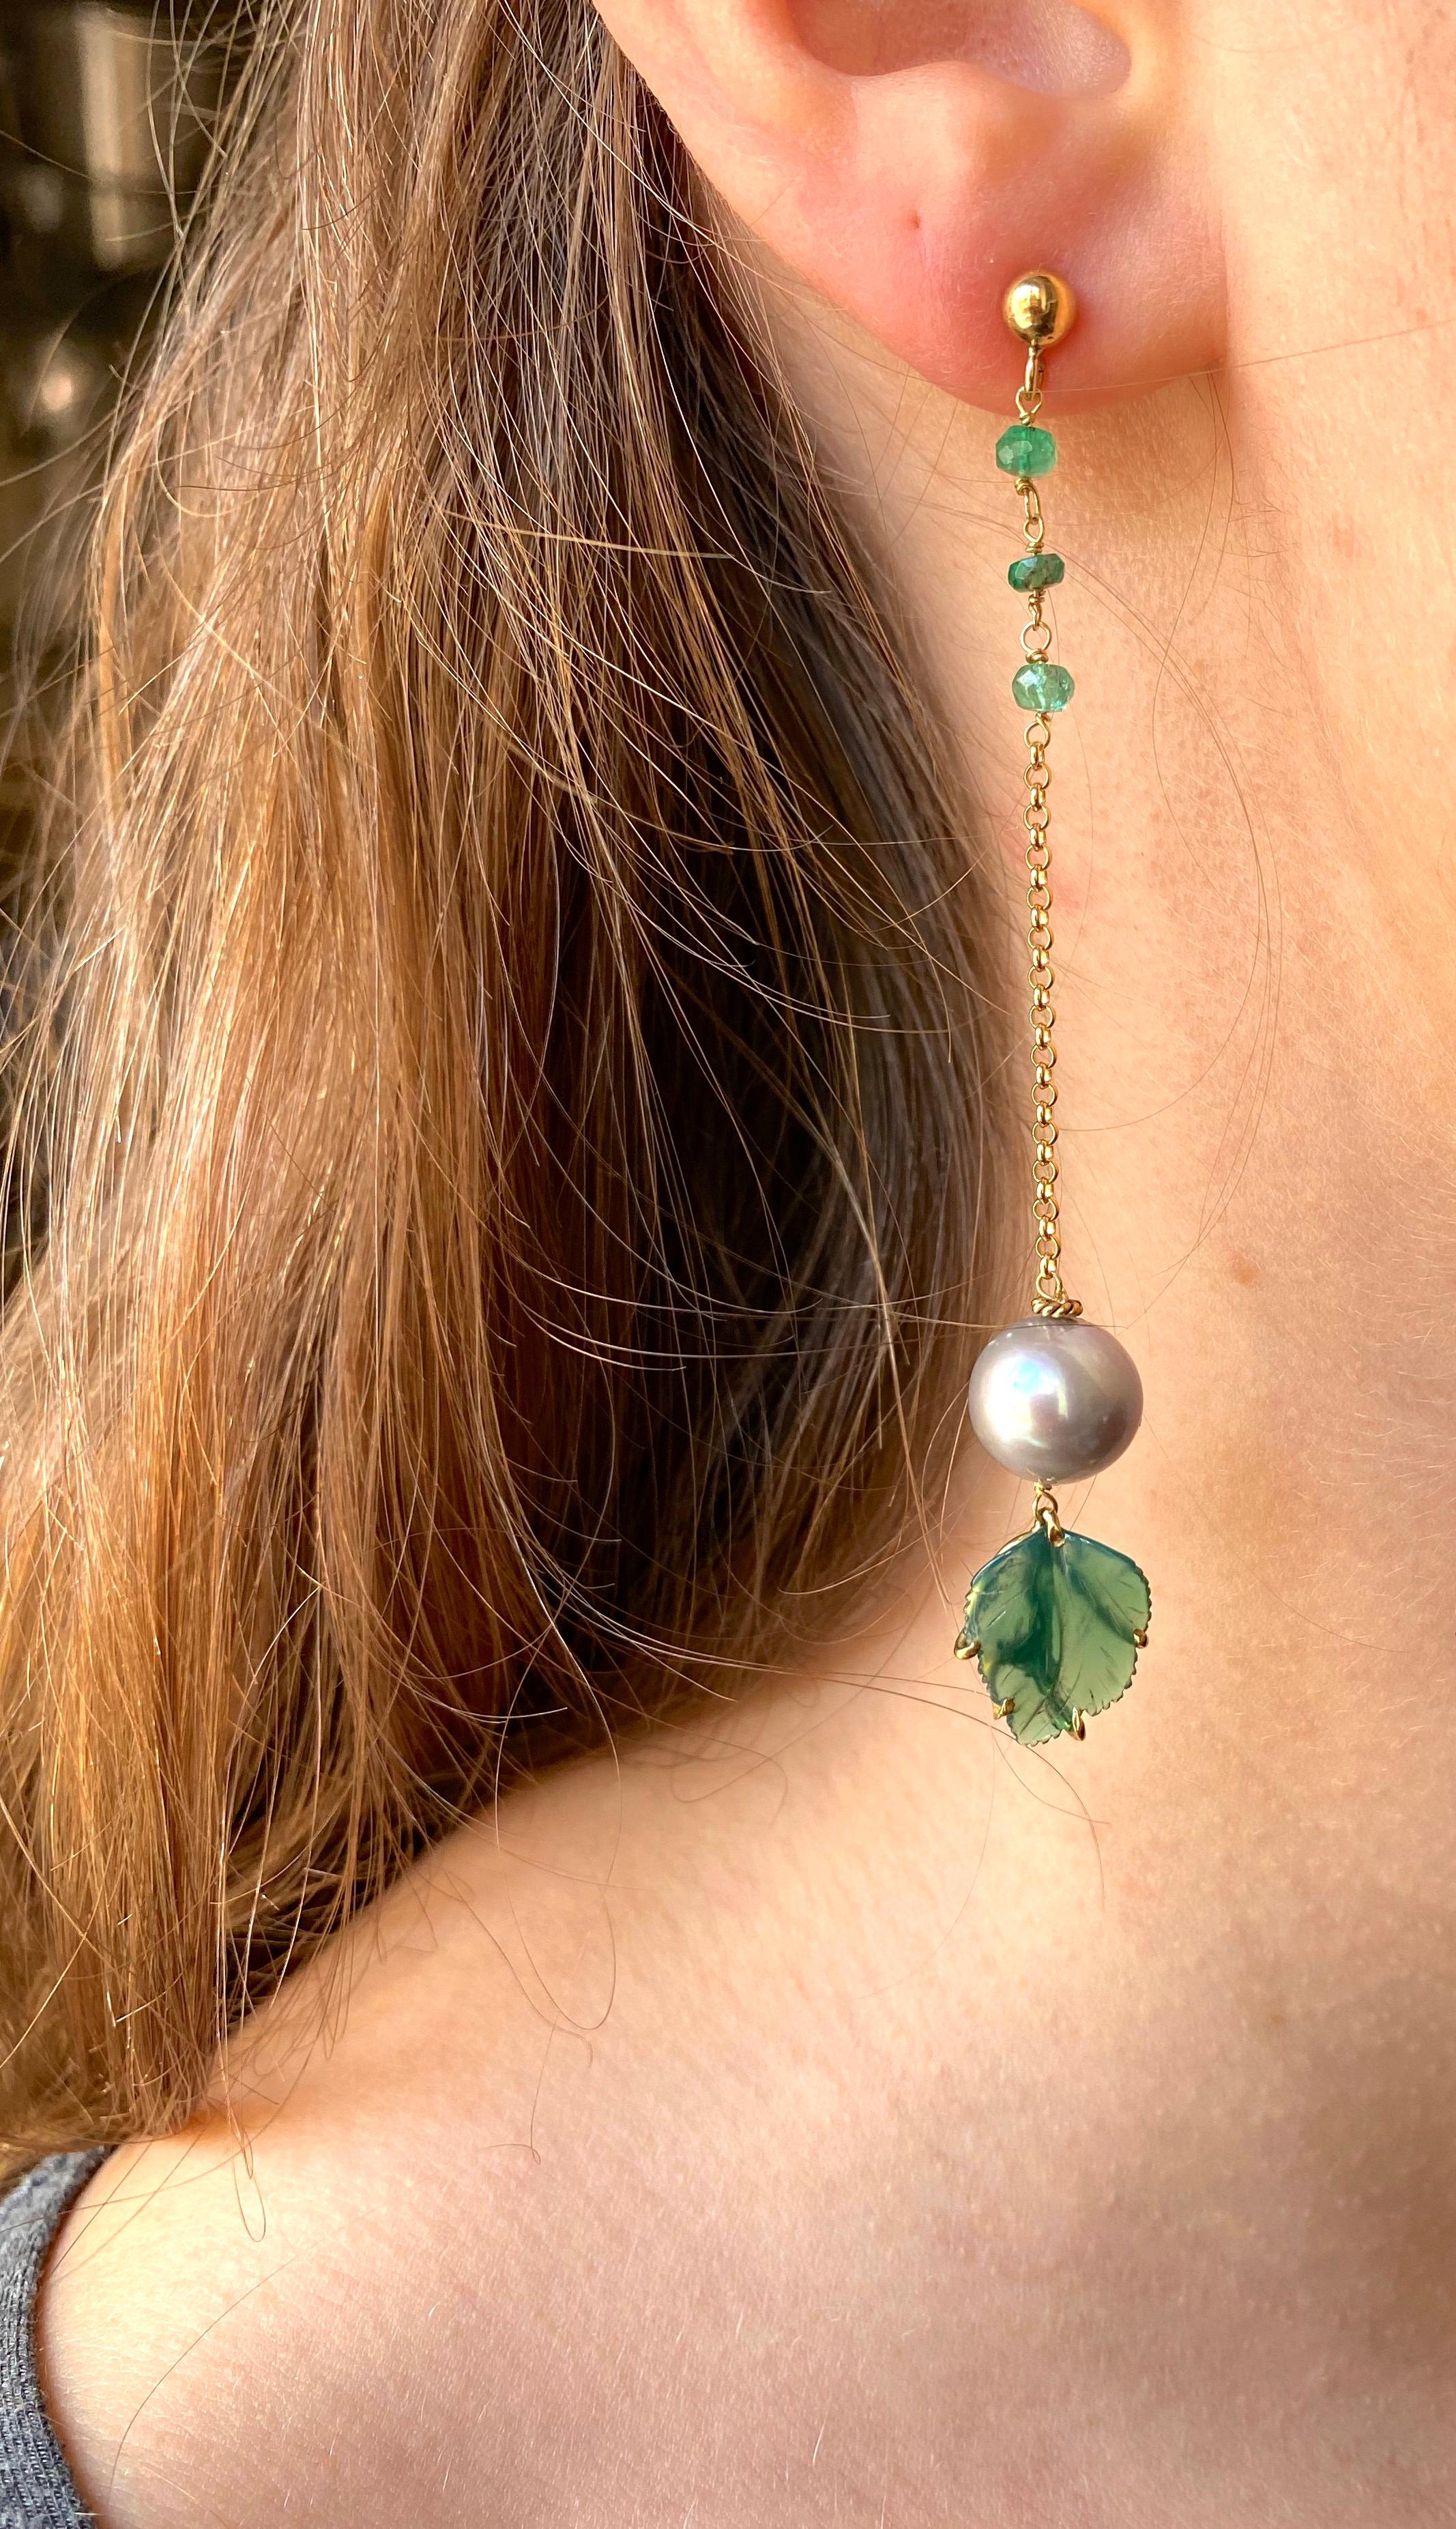 Available Now. Rossella Ugolini Design Collection,  Handcrafted earrings in 18 Karat Yellow Gold 0.12 Karat Emerald beads and Green Agate leaves and grey pearls. 
The verdant splendor of nature finds its way into these magnificent earrings, crafted